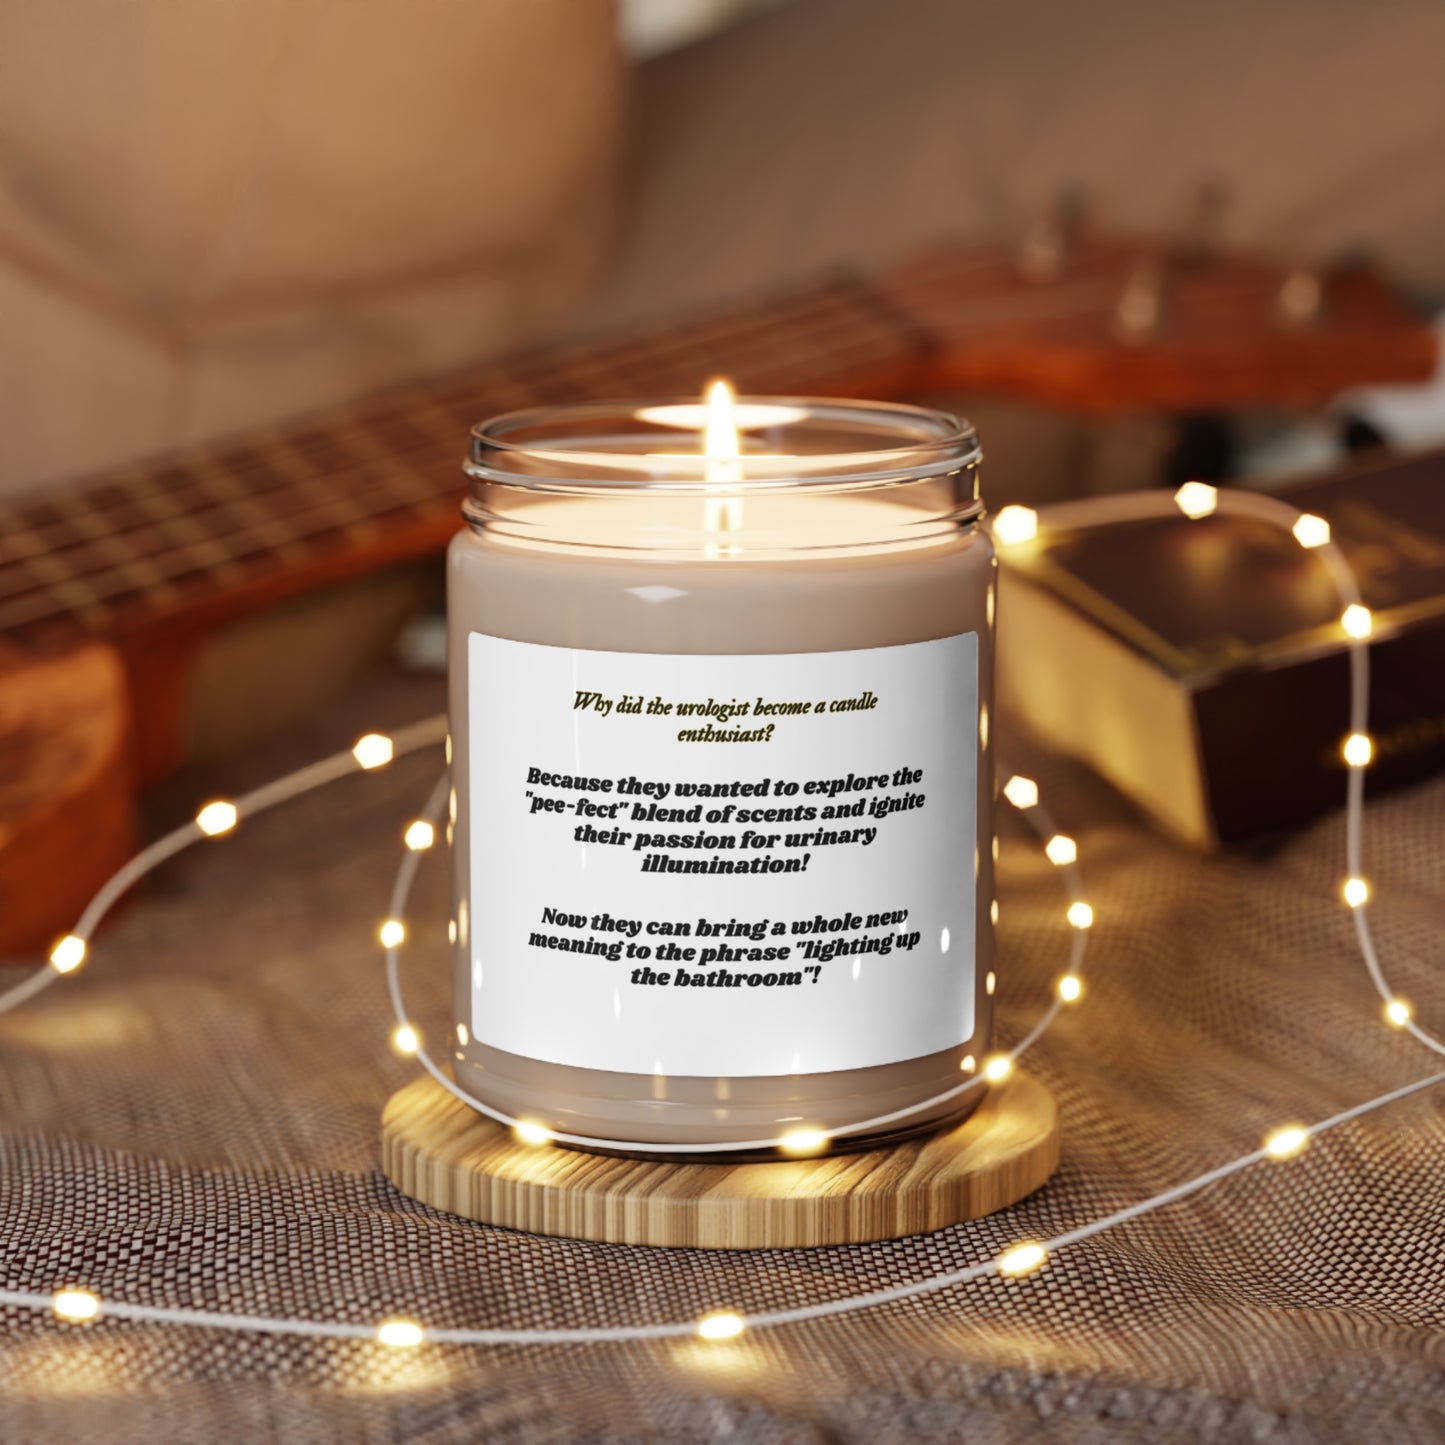 Lighten the Mood with Our Urologist's Delight Candle - A Funny and Unique Gift for Urologists Home Decor Apple Harvest 9oz 